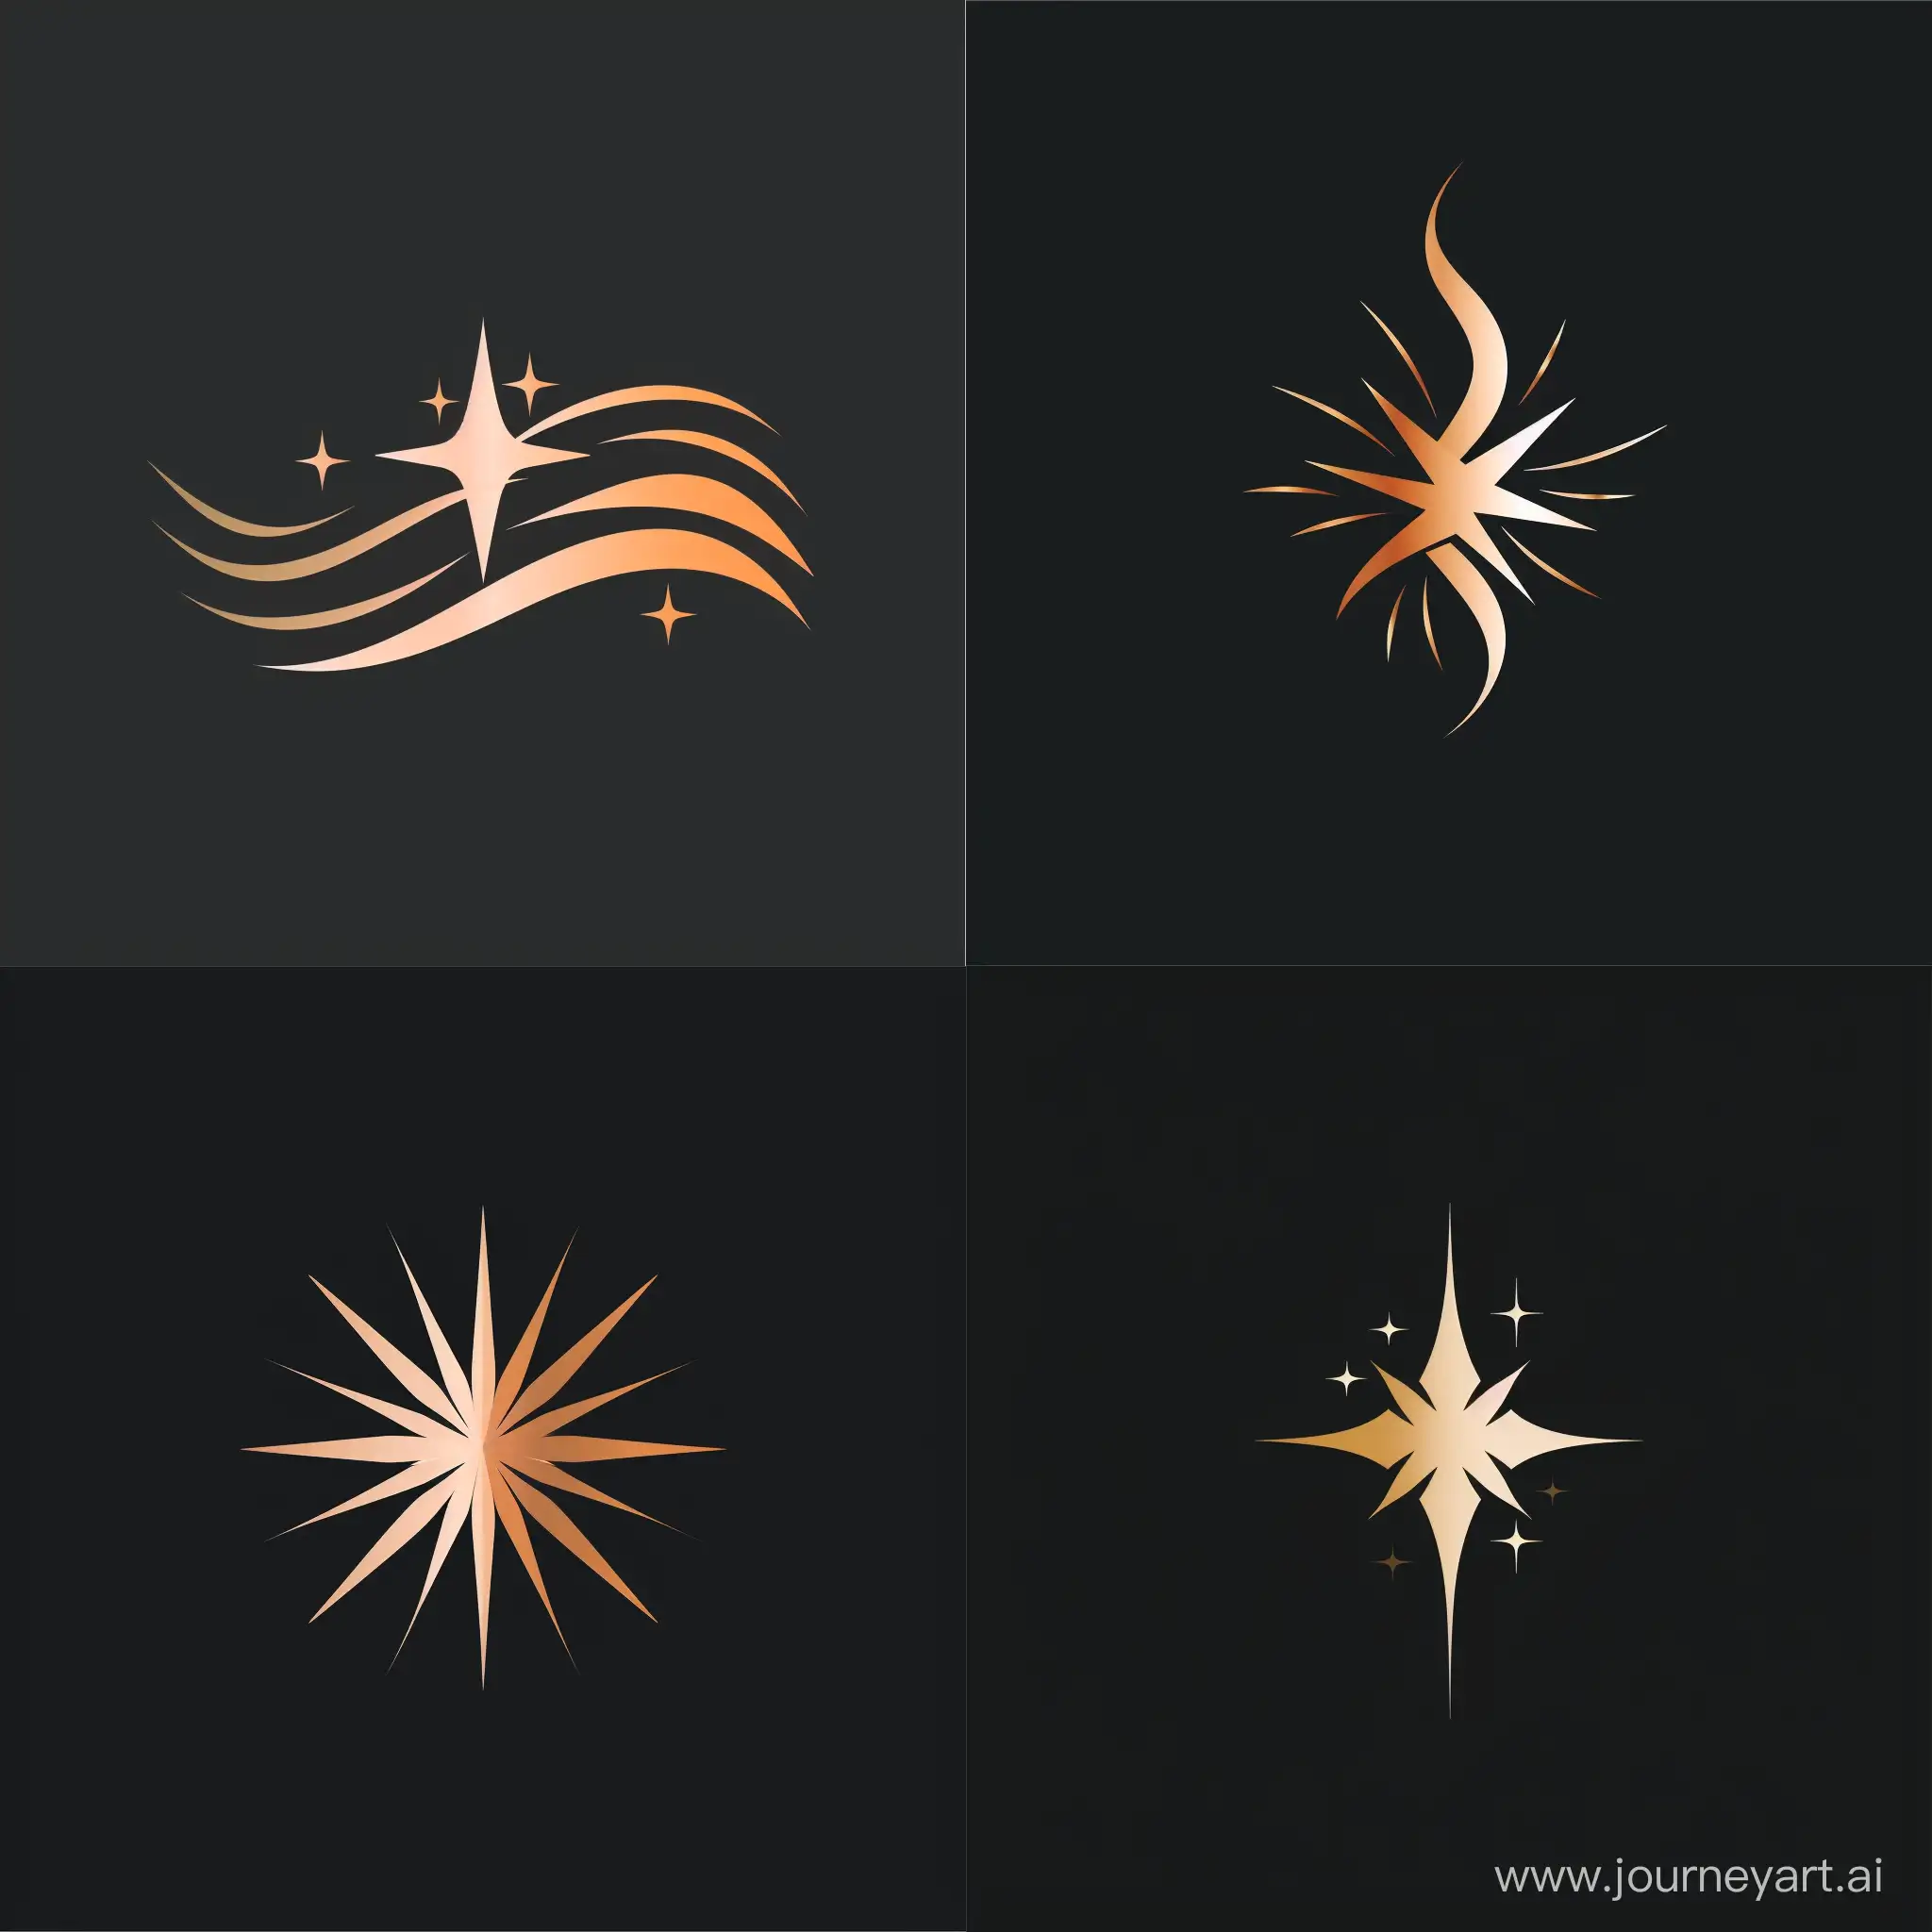 I envision a logo featuring a radiant star with sleek, flowing lines to evoke glamour and elegance. Incorporate a subtle touch of luxury, perhaps through a refined color palette and minimalistic details. Aim for a design that resonates with the sophistication of a renowned brand. I also need a good name for the brand.
